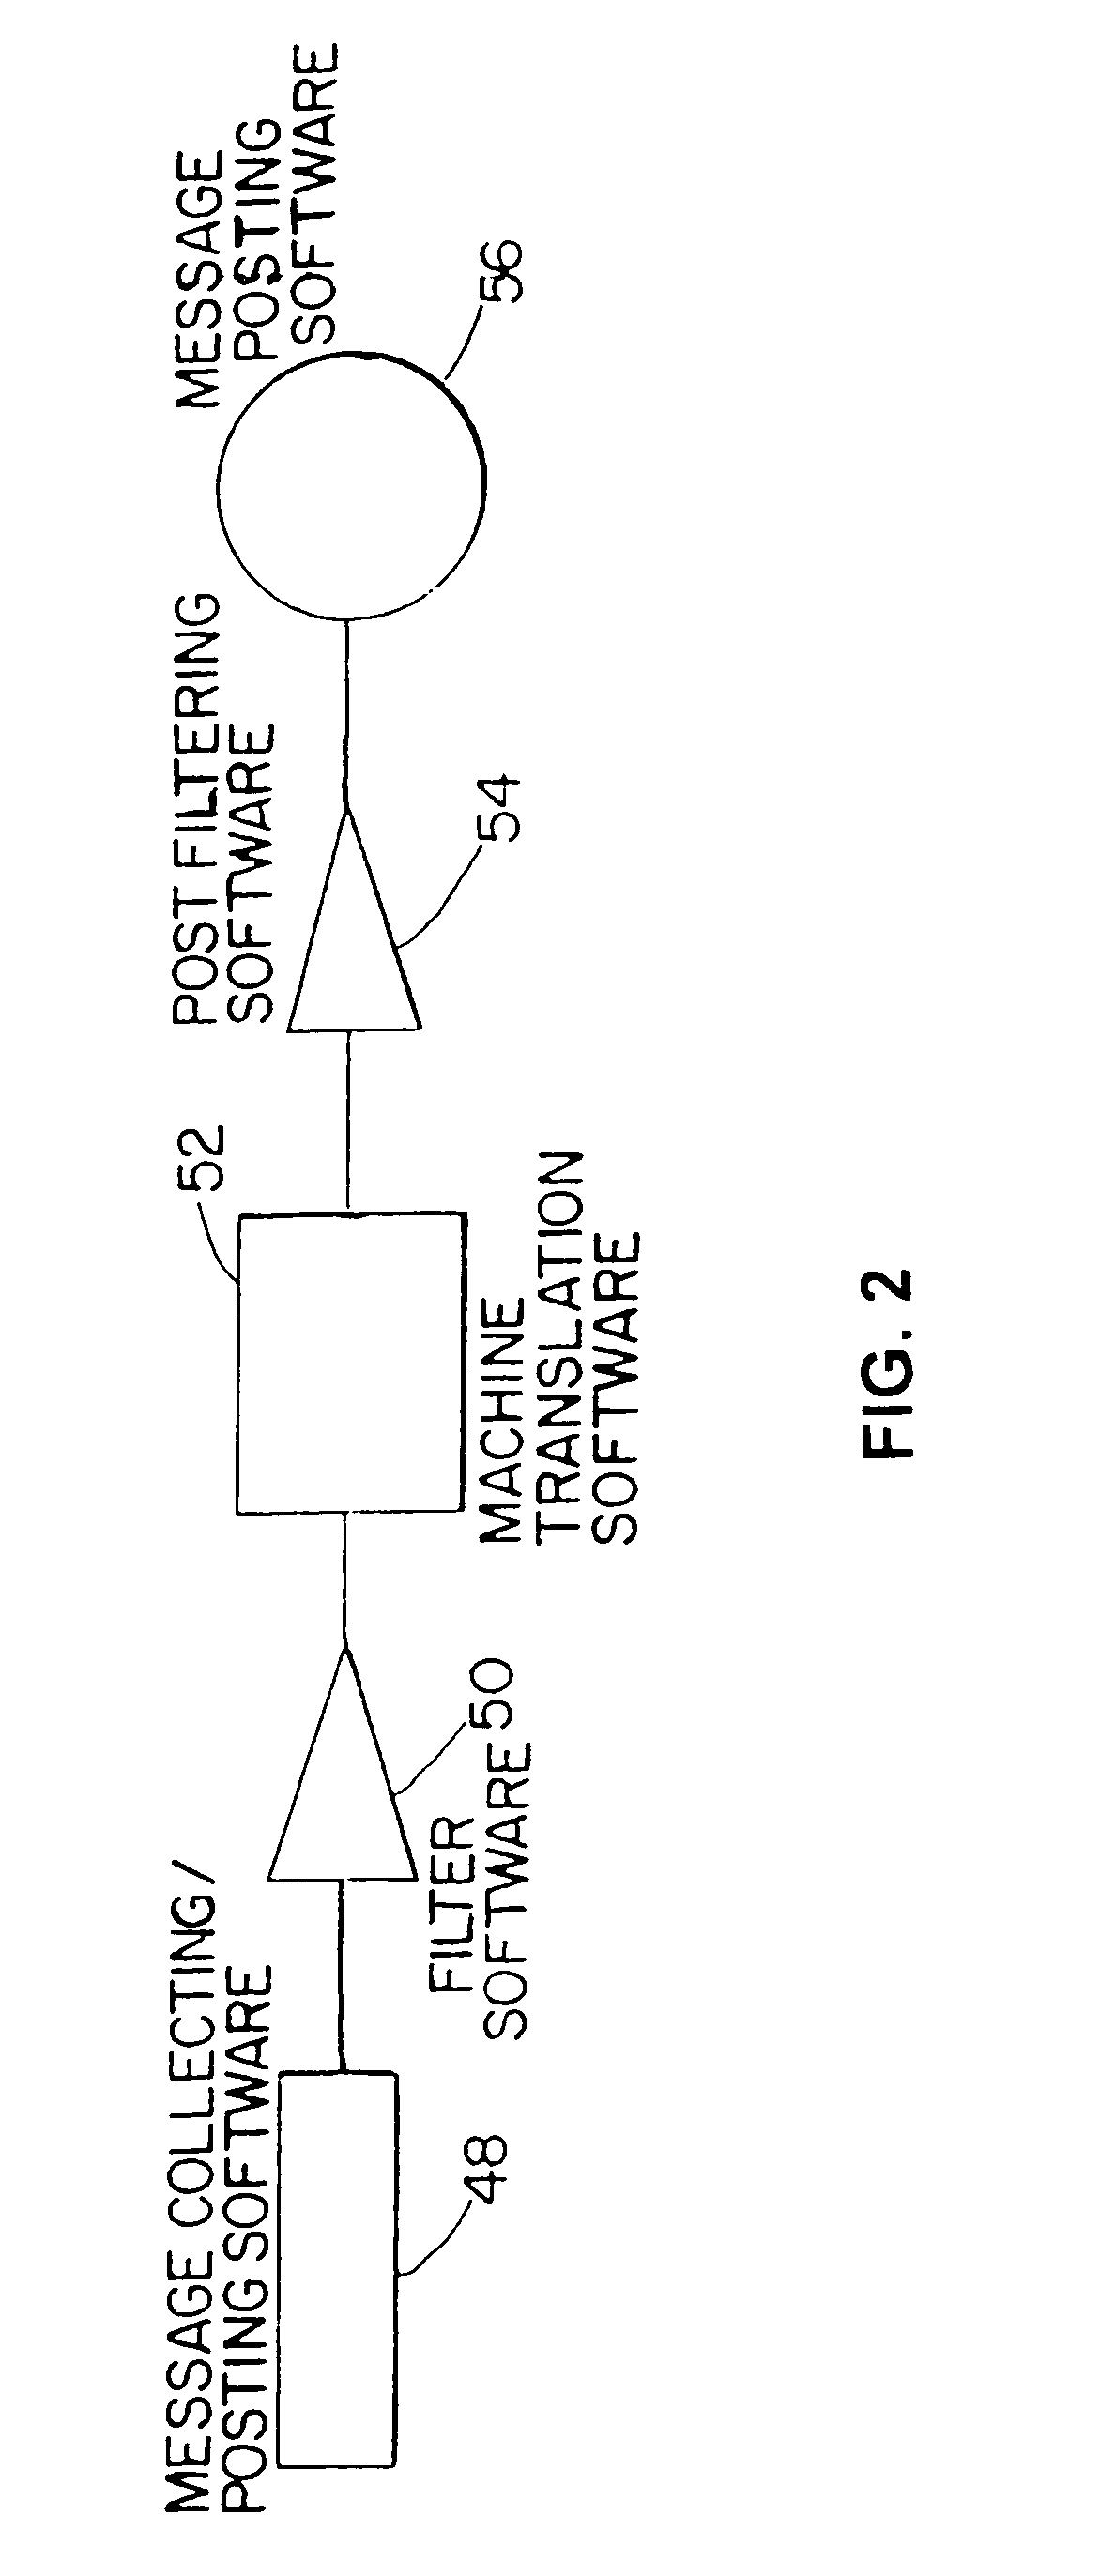 System for automated translation of speech